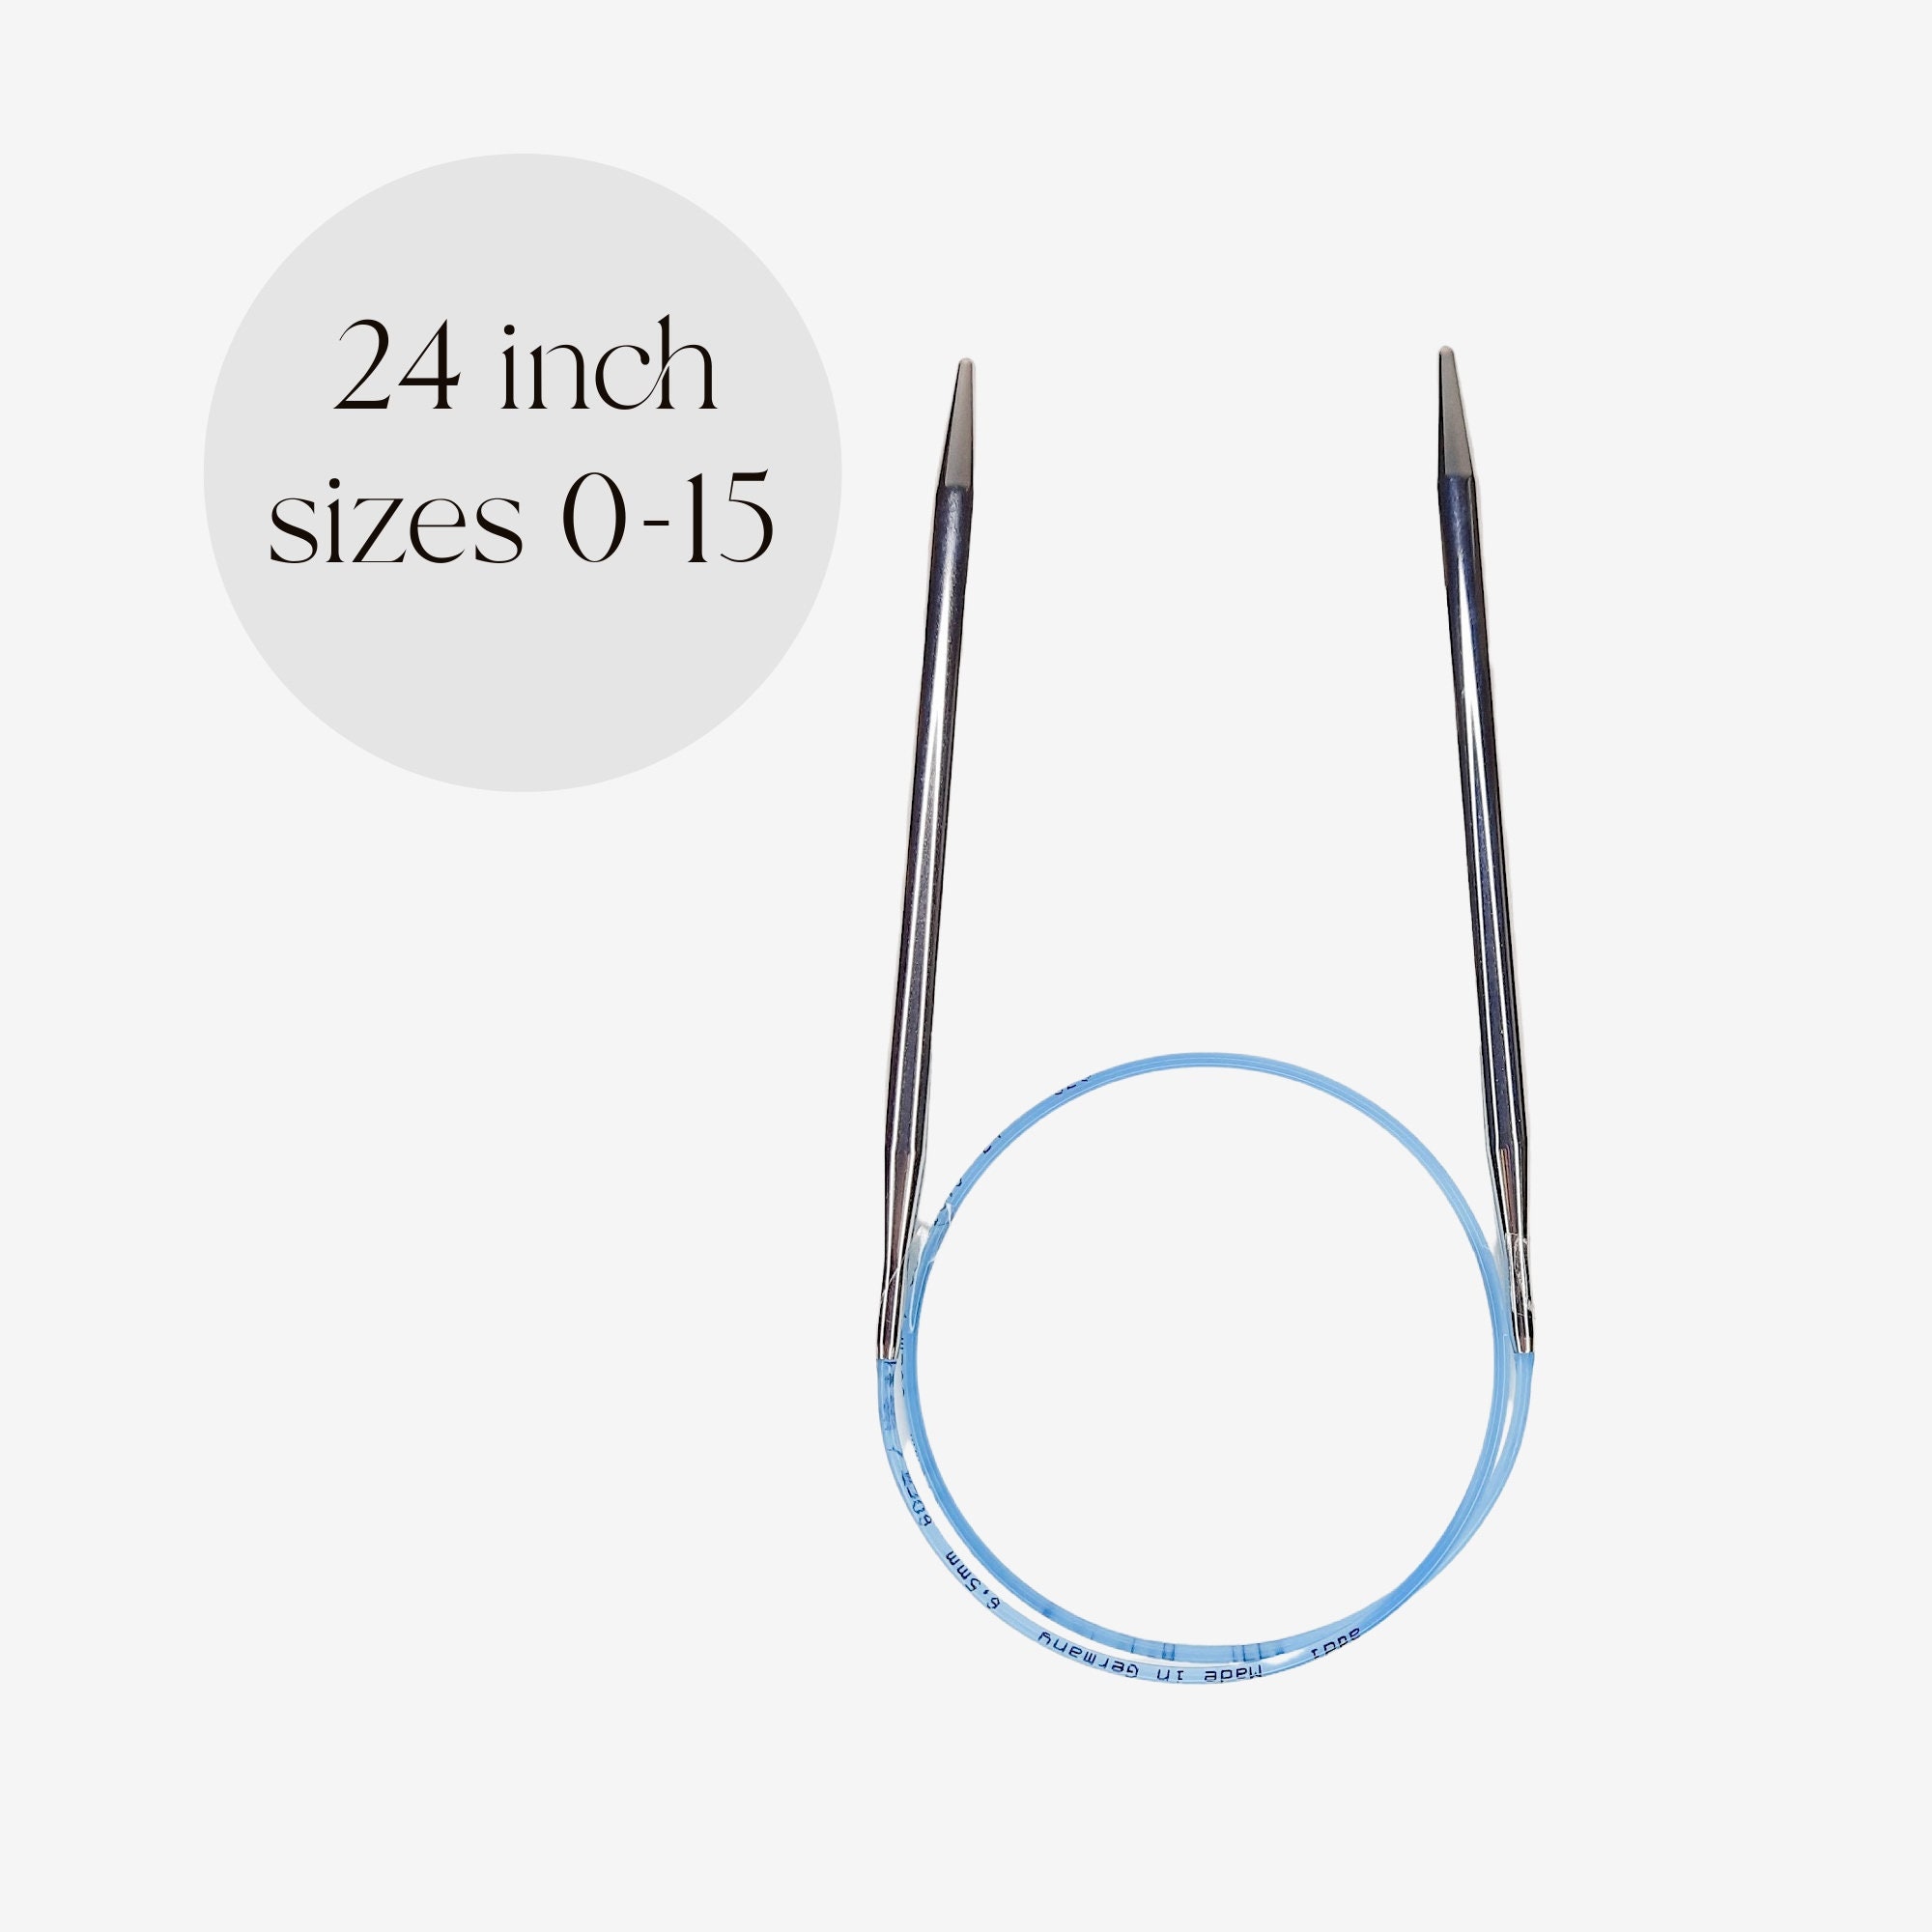 Drops 5 Inches Interchangeable Knitting Needles Set Metal Size  Us4-us11/3.5mm-8.00mm Drops Classic Interchangeable Needle Set 